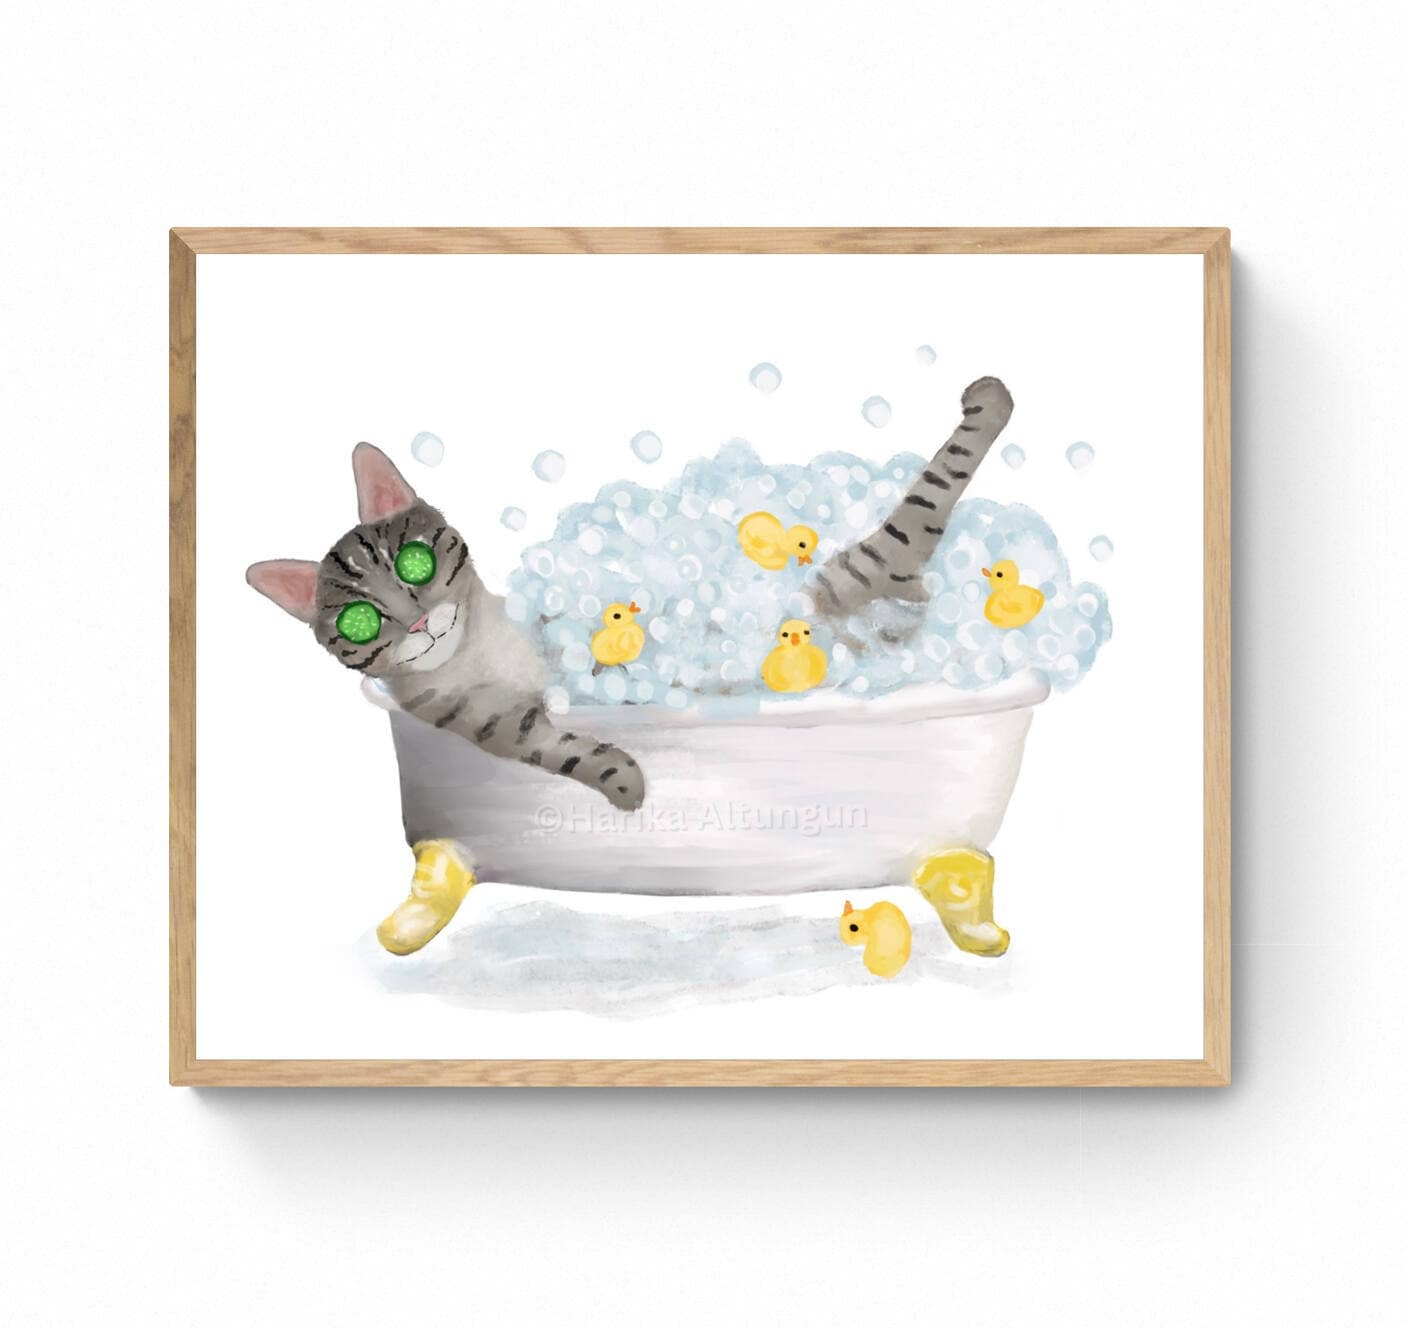 Gray Tabby Cat Bathing Print, Funny Bubble Bath Time, Bathroom Cat Painting, Cat Relaxing In Bath Print, Cat Lover Gift, Ct Mom Dad Gift